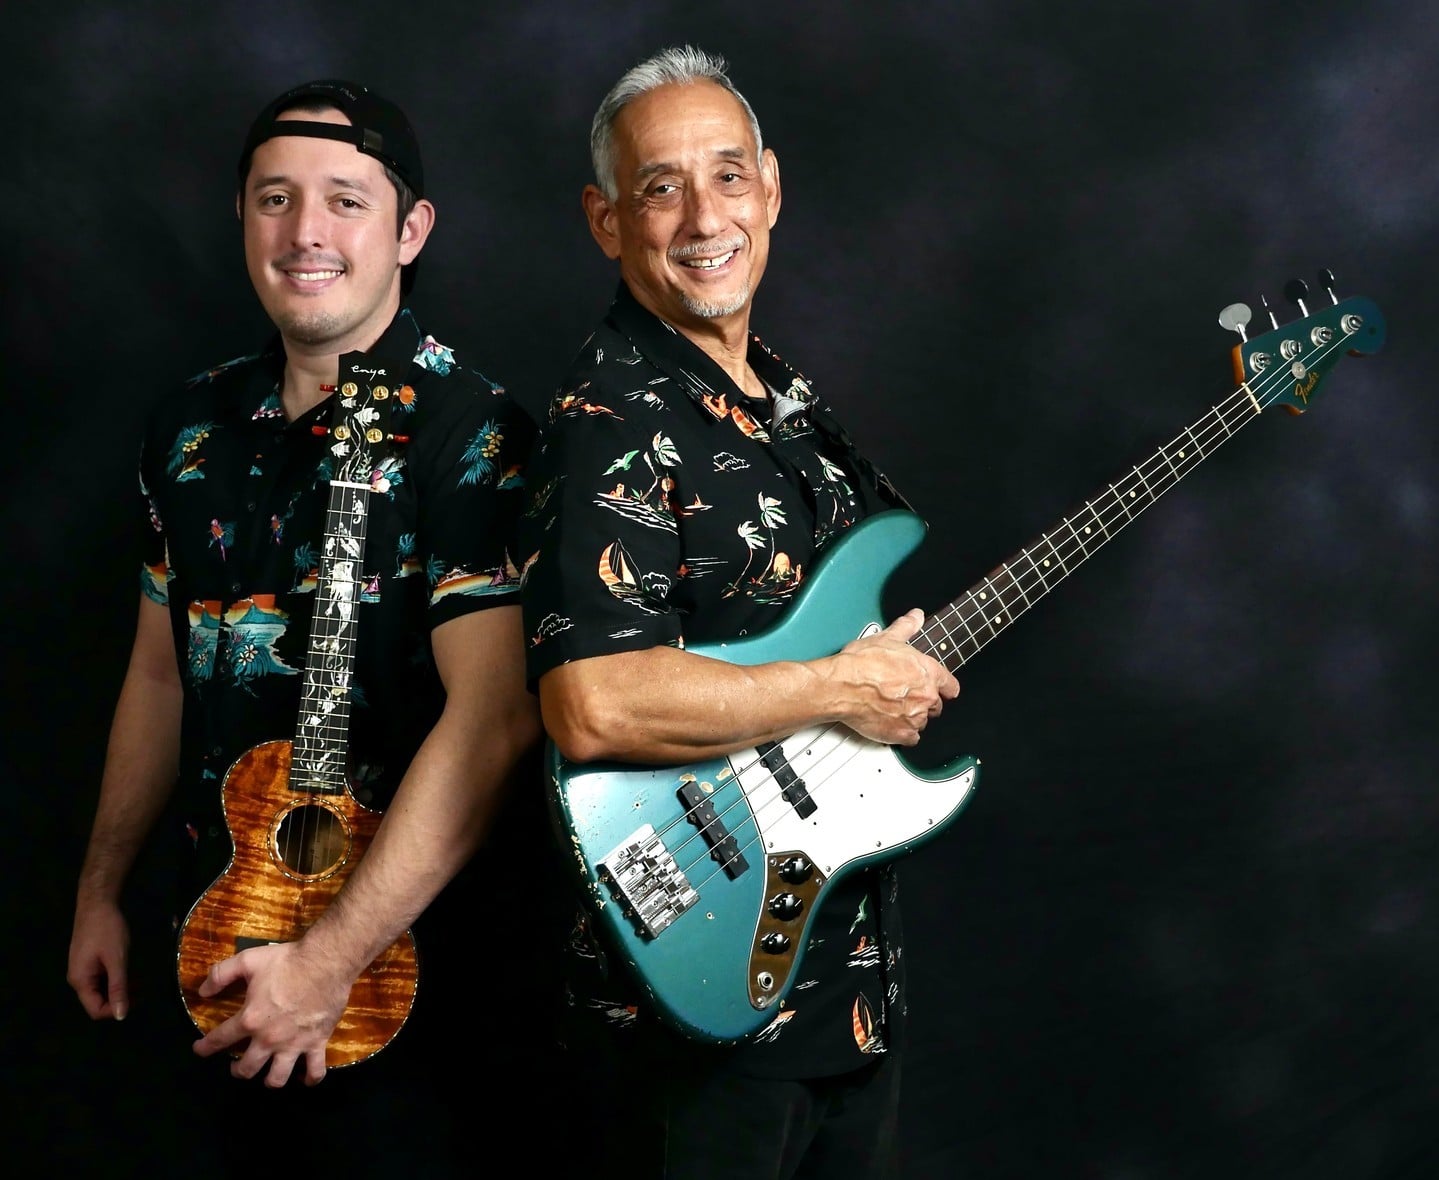 Our Aloha Friday Holiday Music Series continues today, Friday, December 16 with sounds from Andrew & Jay Molina from 12pm – 1pm in the South Shore Market courtyard. Grab lunch from one of our neighborhood eateries, sit back and celebrate the season!